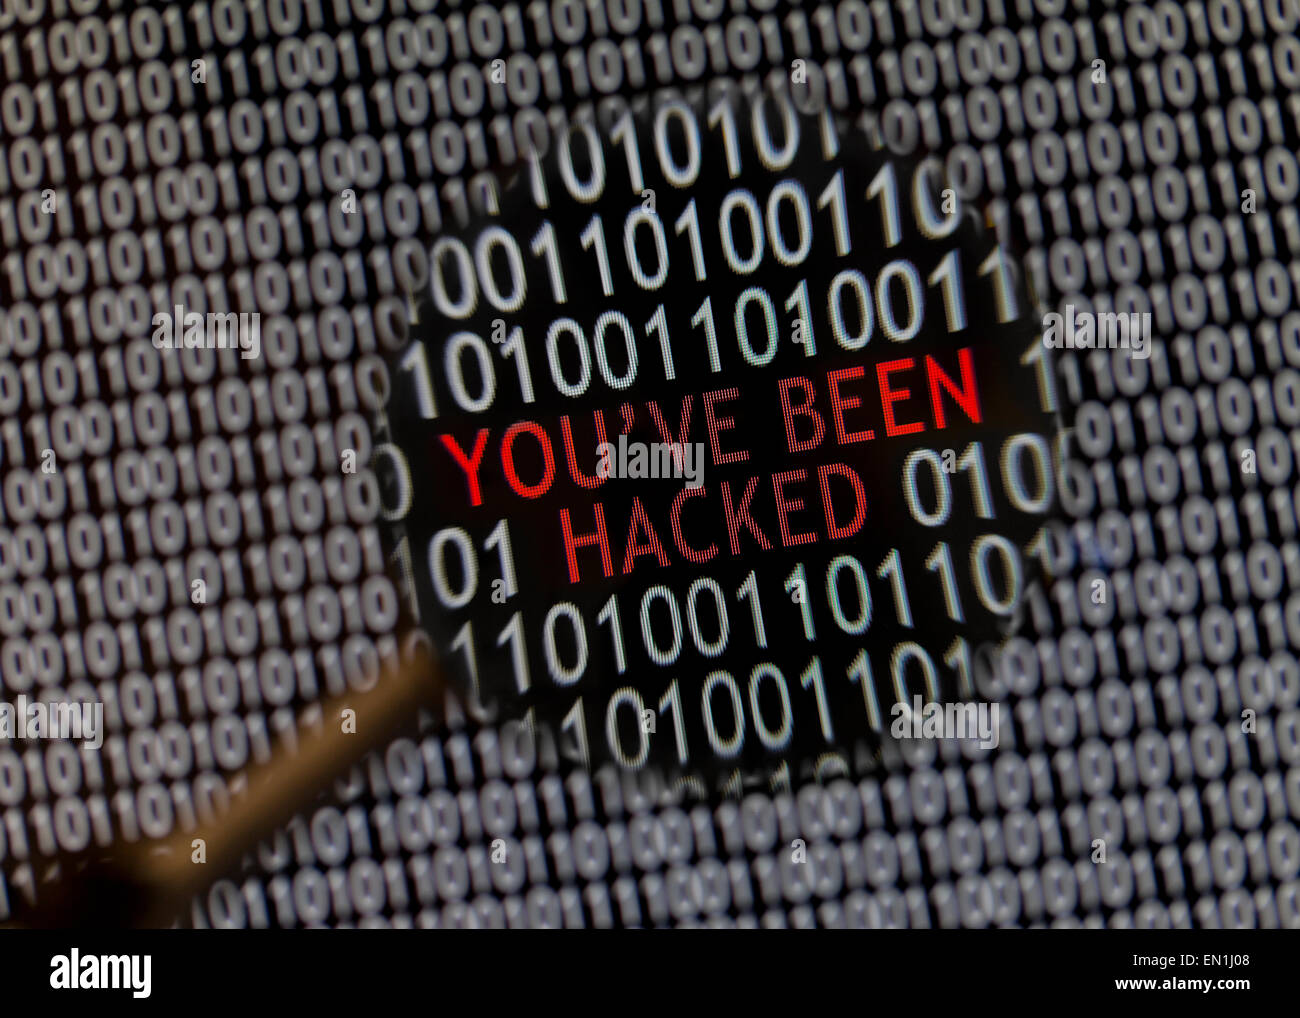 Hacked message on computer screen Stock Photo